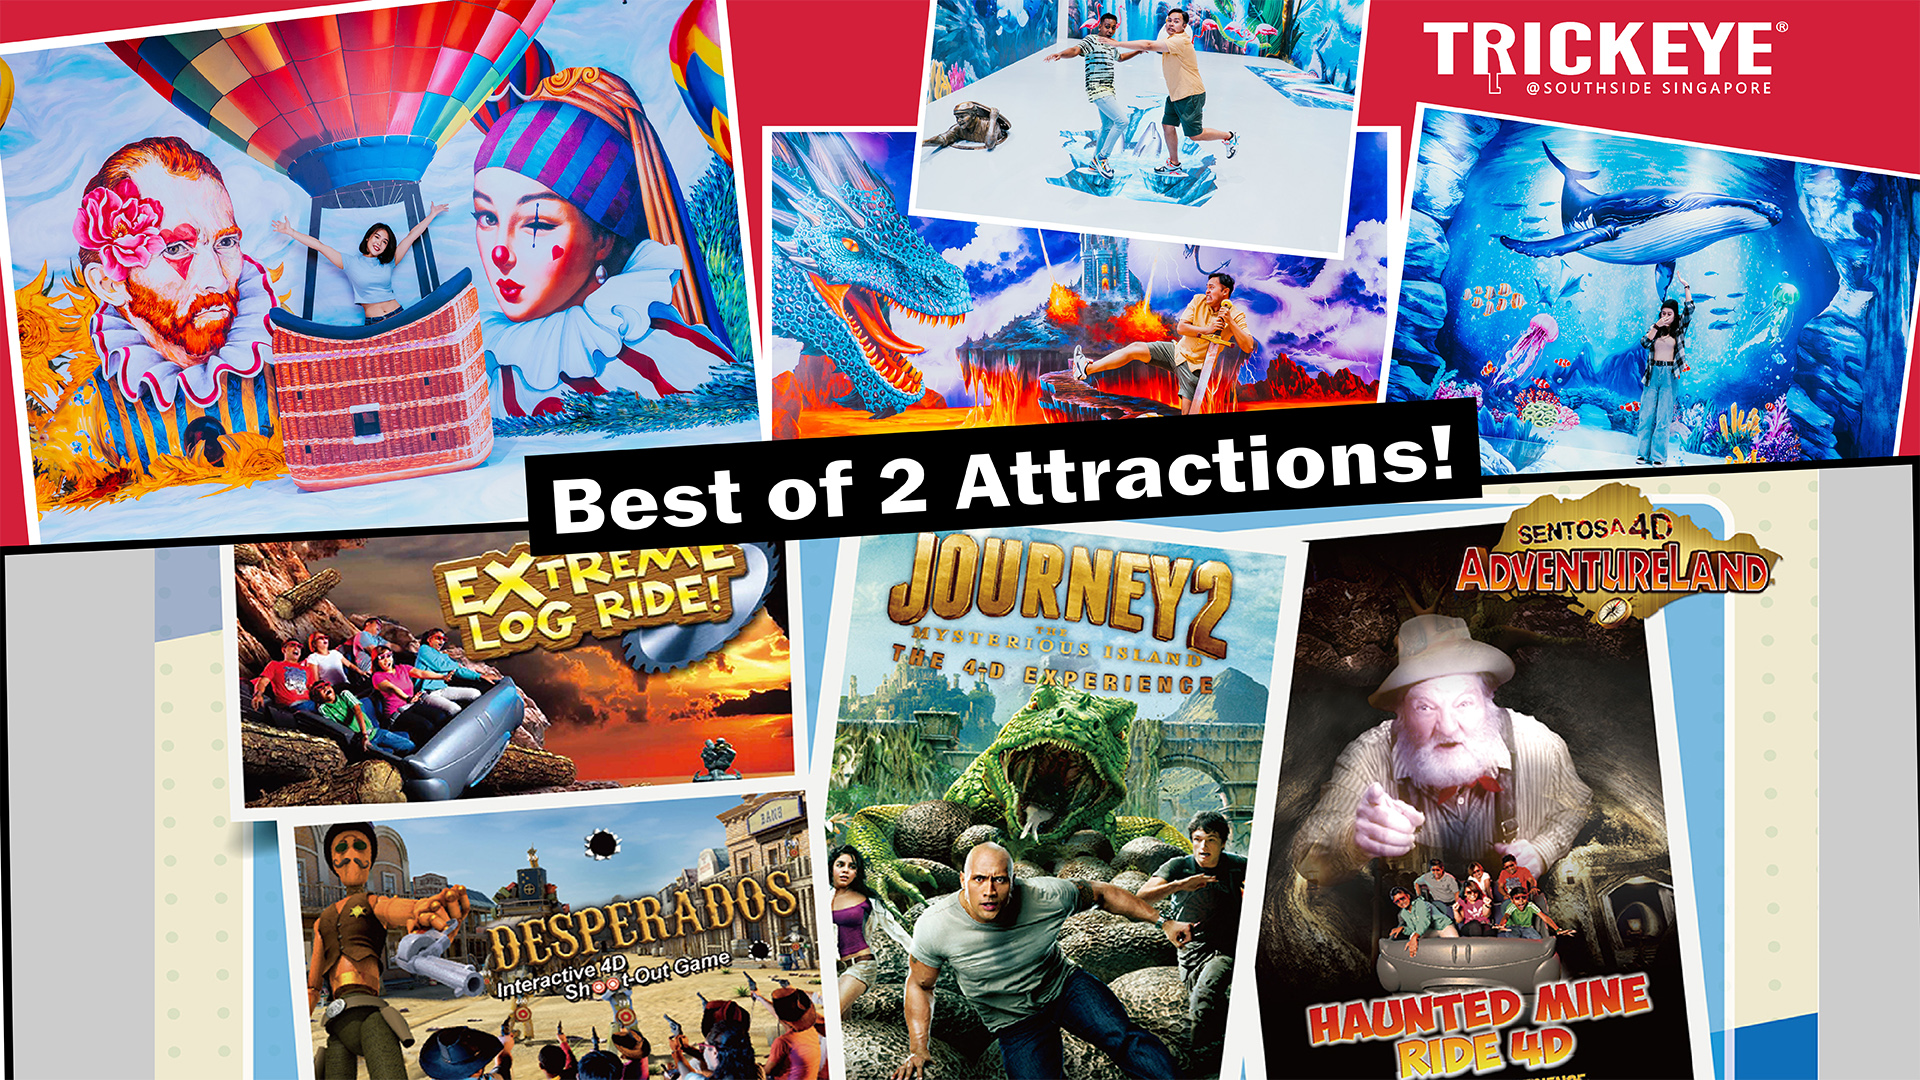 (Child) Trickeye @ Southside Admission + Sentosa 4D AdventureLand - 4-in-1 Combo (Up to 25% Off)